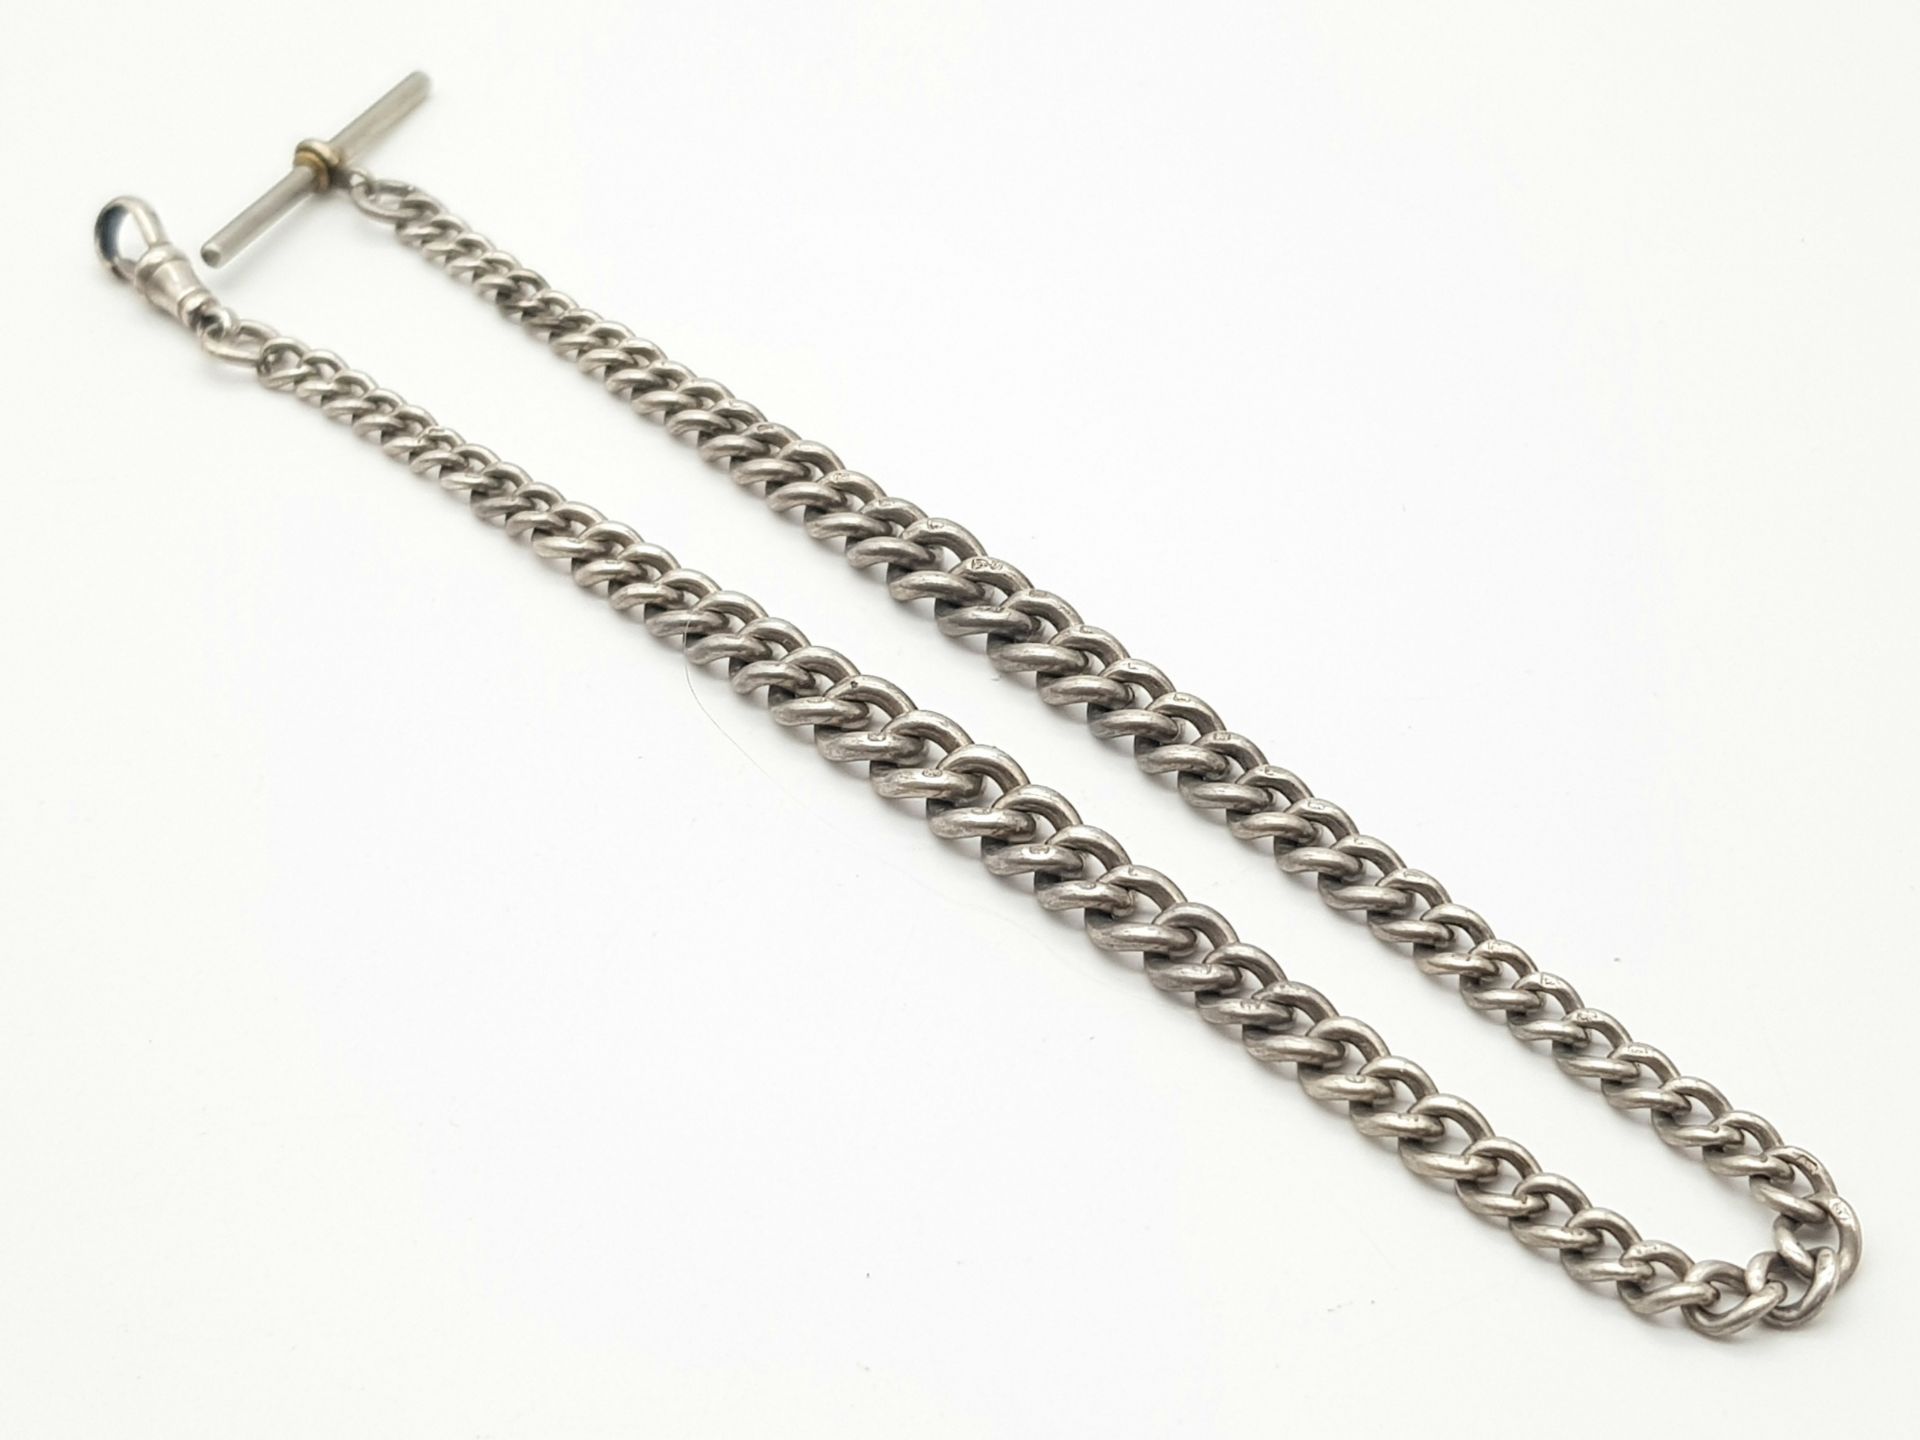 A Vintage/Antique Sterling Silver Albert Chain - Faded Hallmarks. 36cm length. 42g - Image 2 of 4